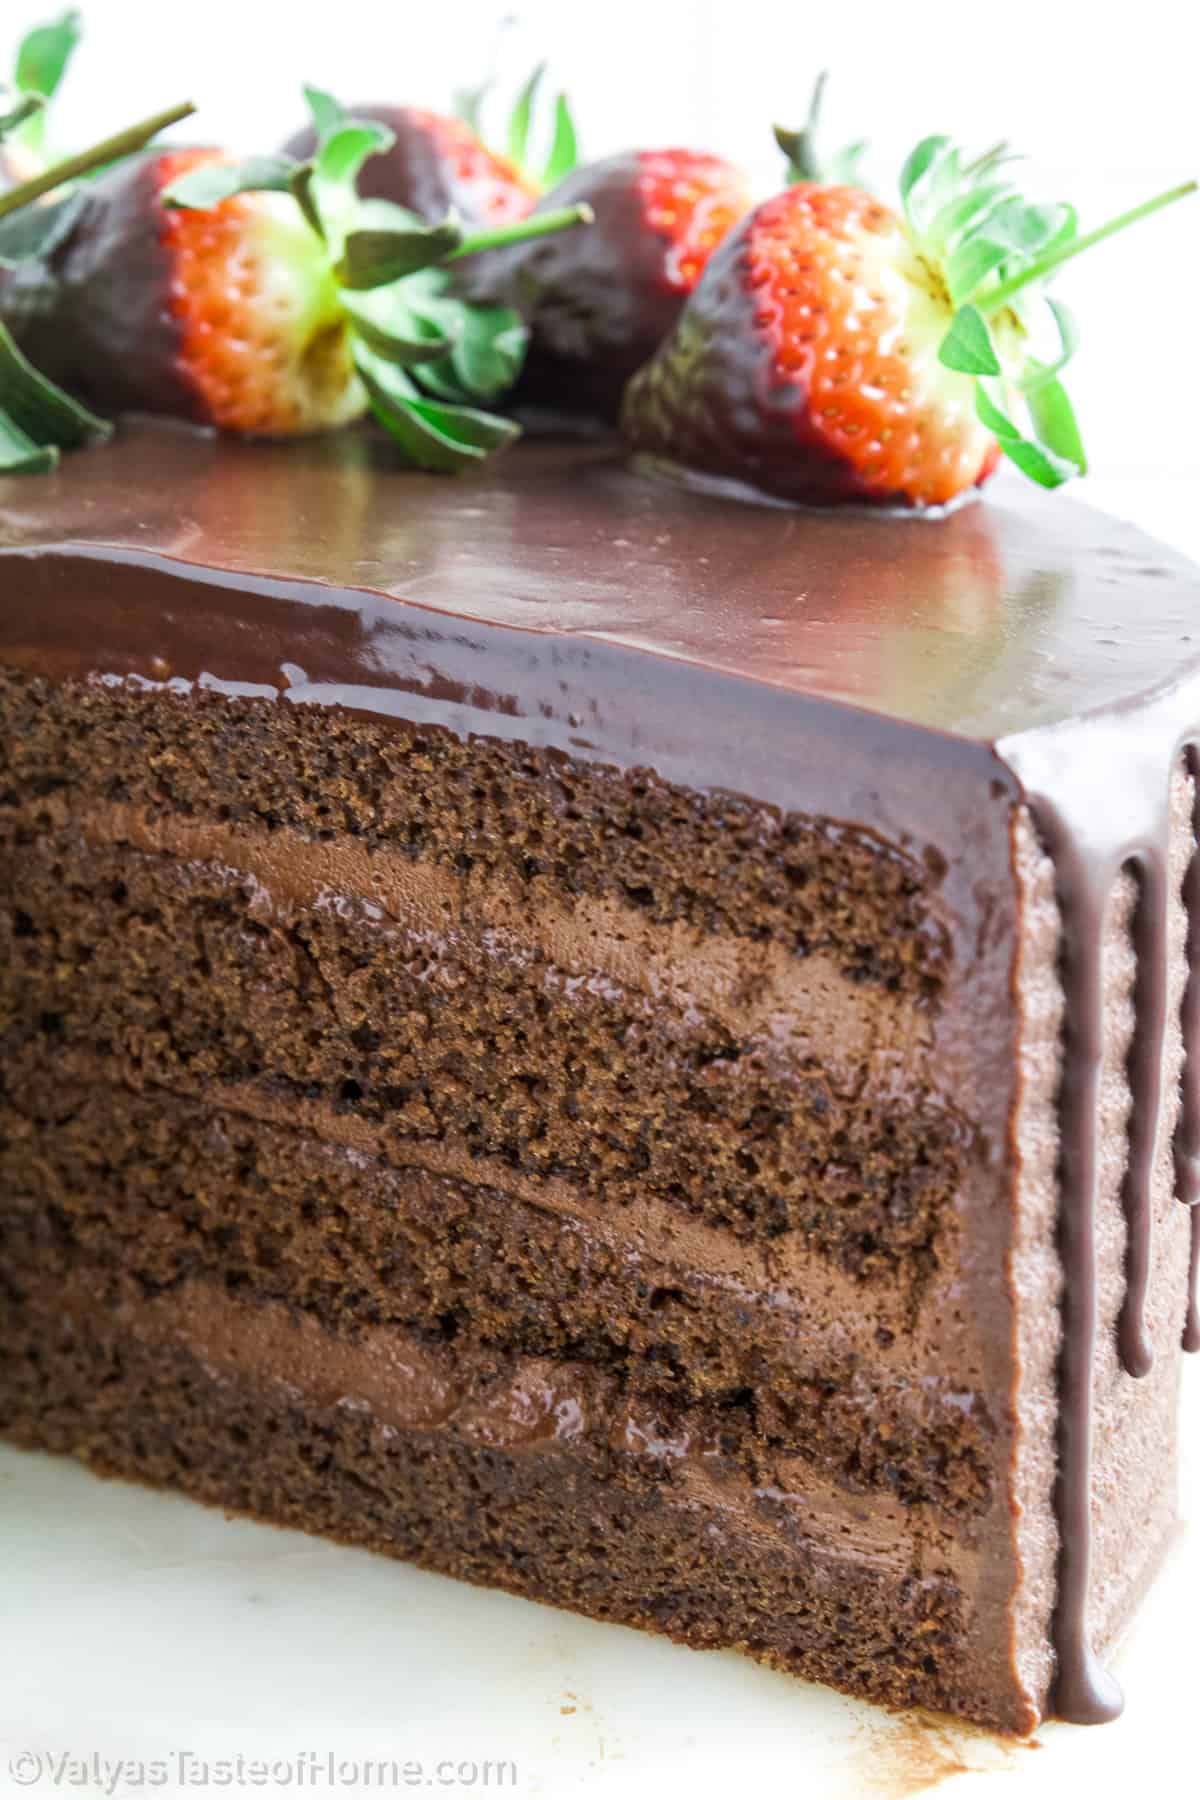 This recipe is a classic for a reason. The combination of chocolate cake and chocolate frosting is simply irresistible.